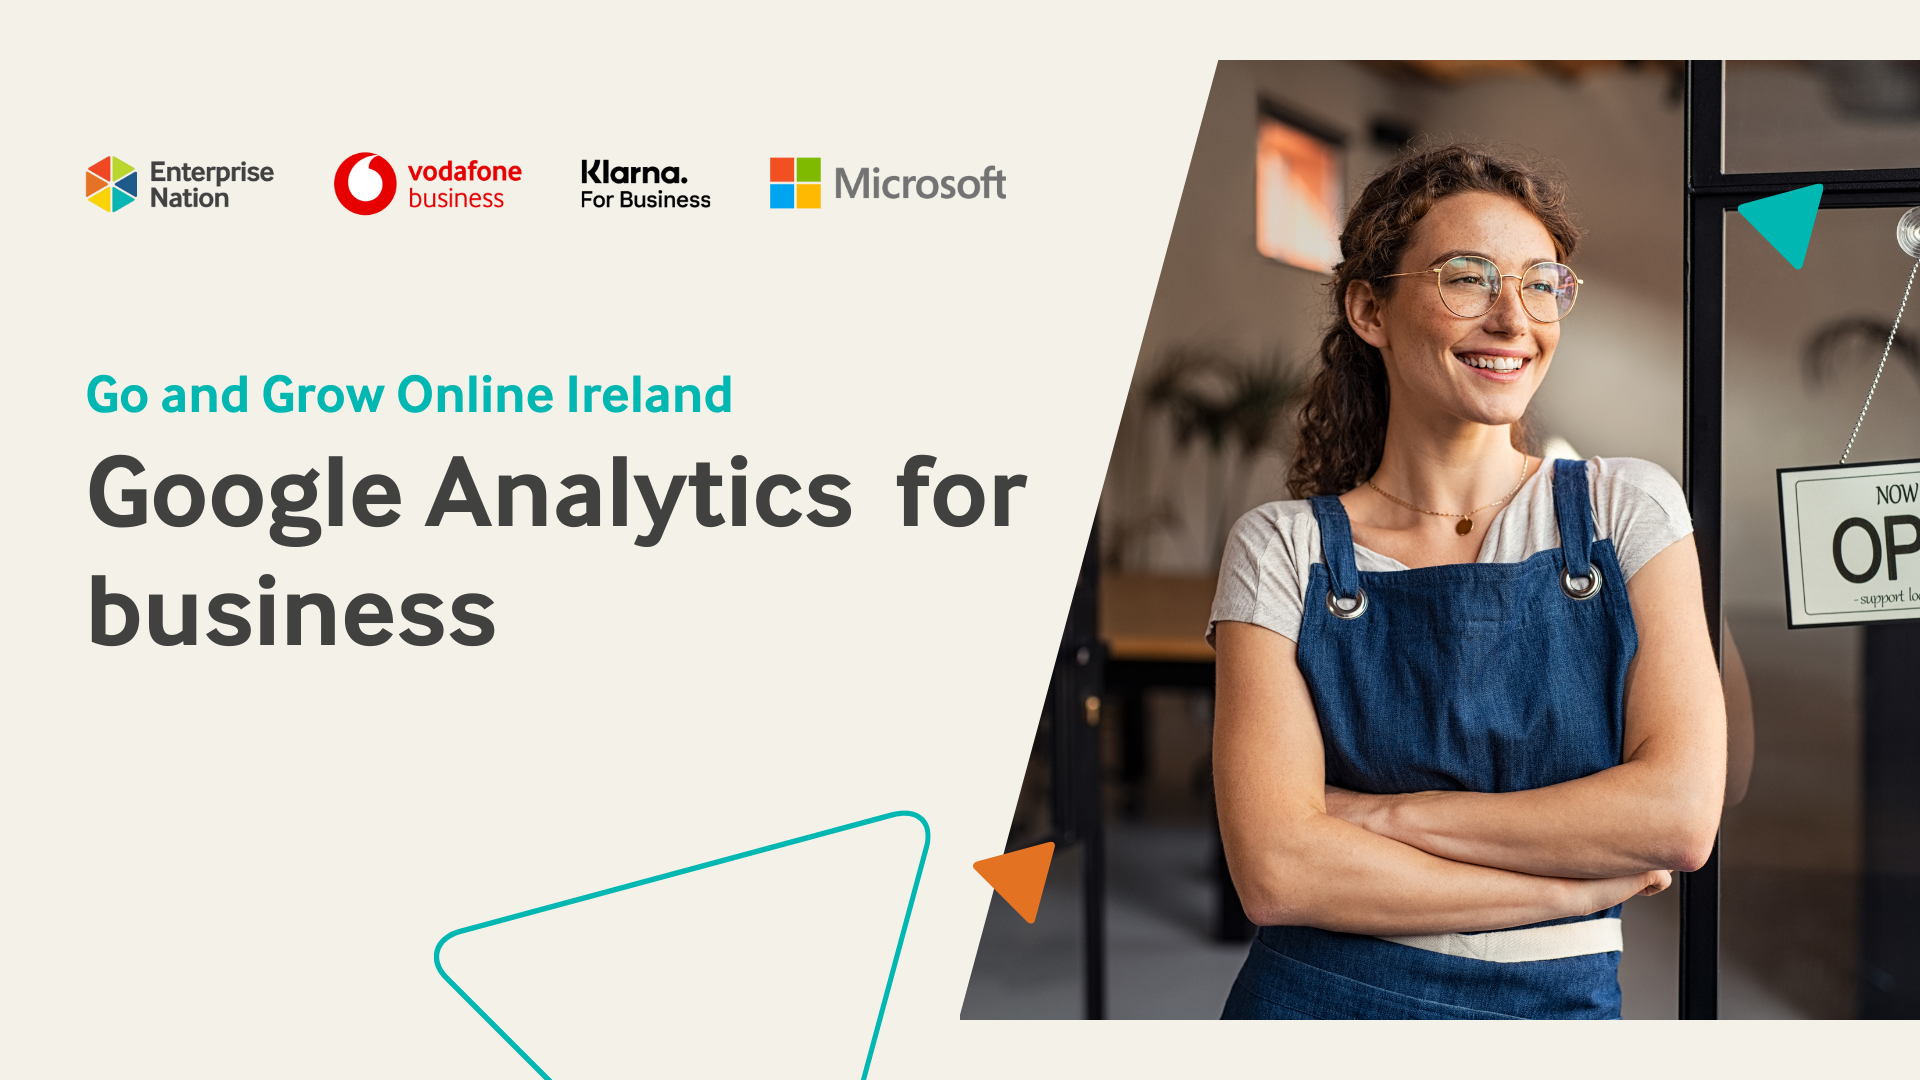 Go and Grow Online: Google Analytics for business